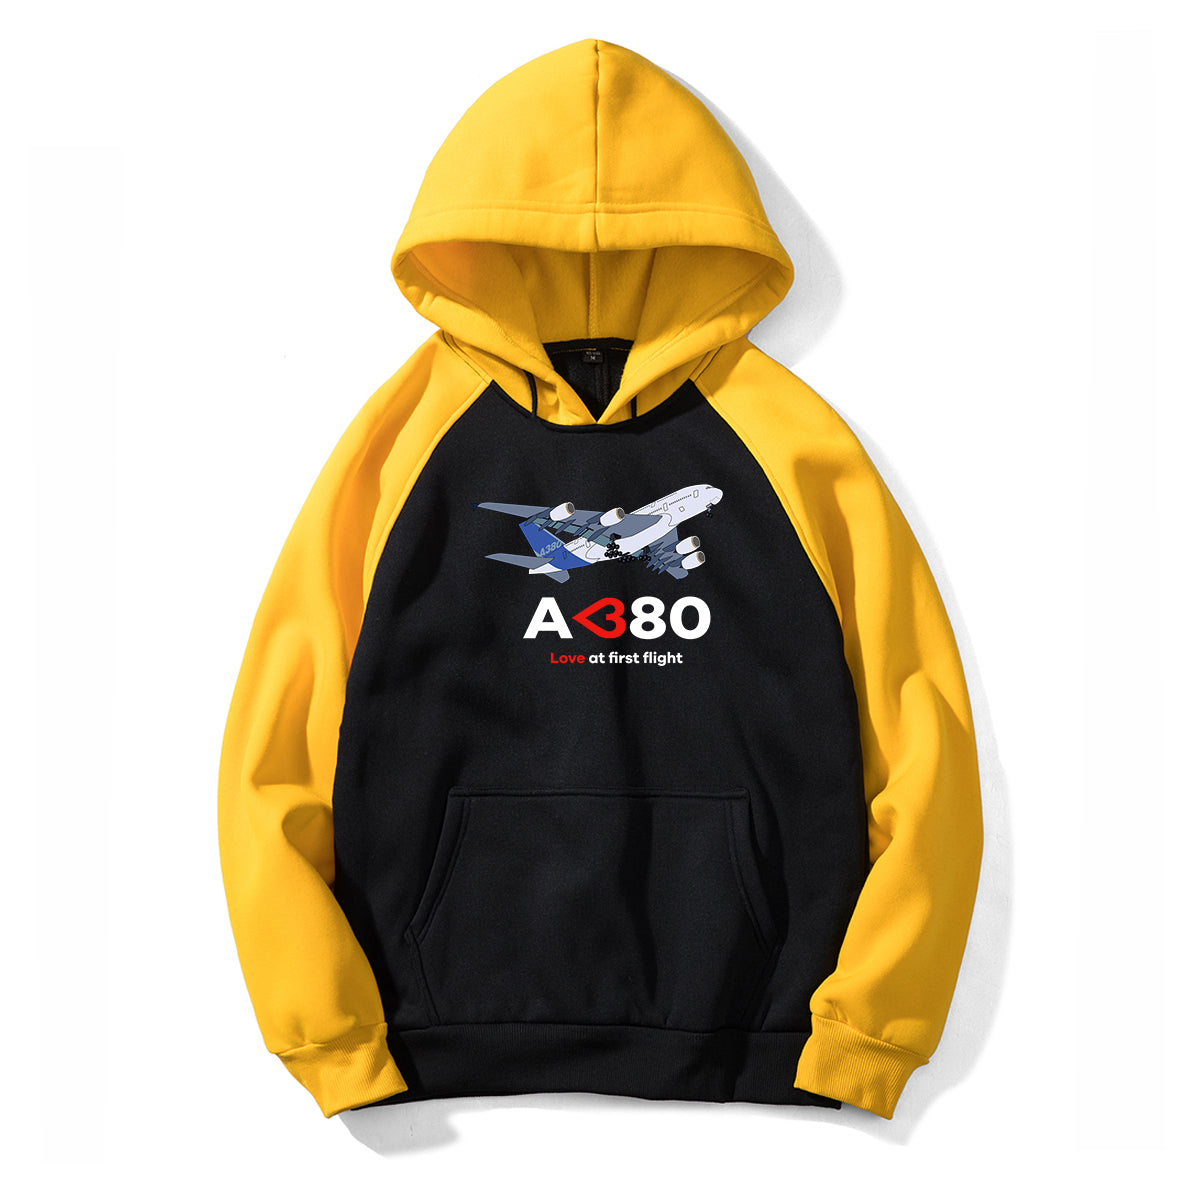 Airbus A380 Love at first flight Designed Colourful Hoodies